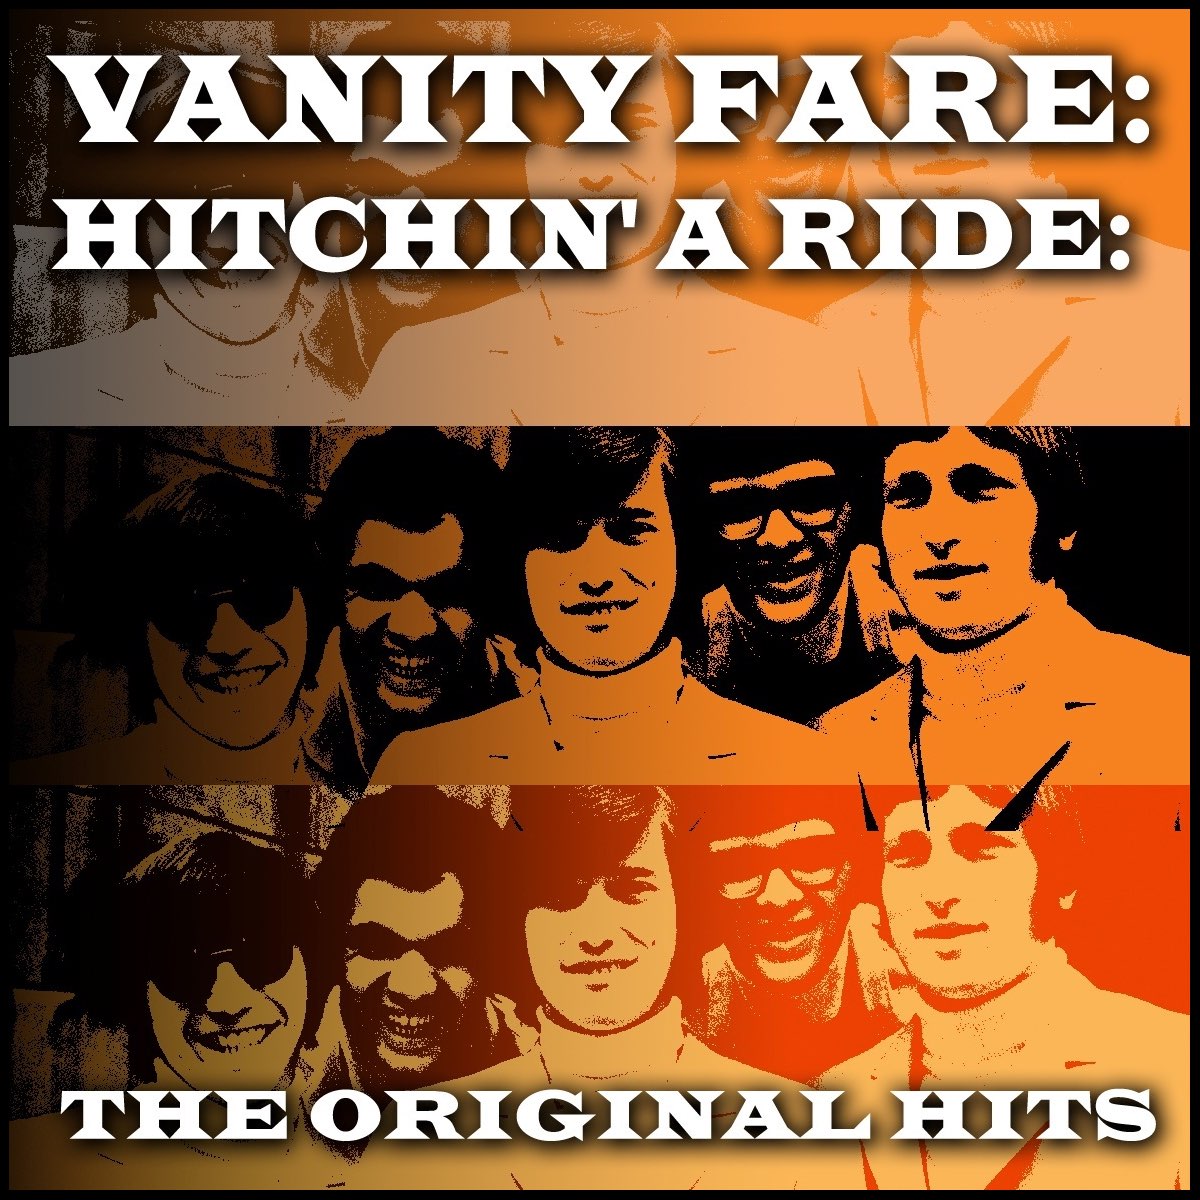 Art for Hitchin' A Ride by Vanity Fare